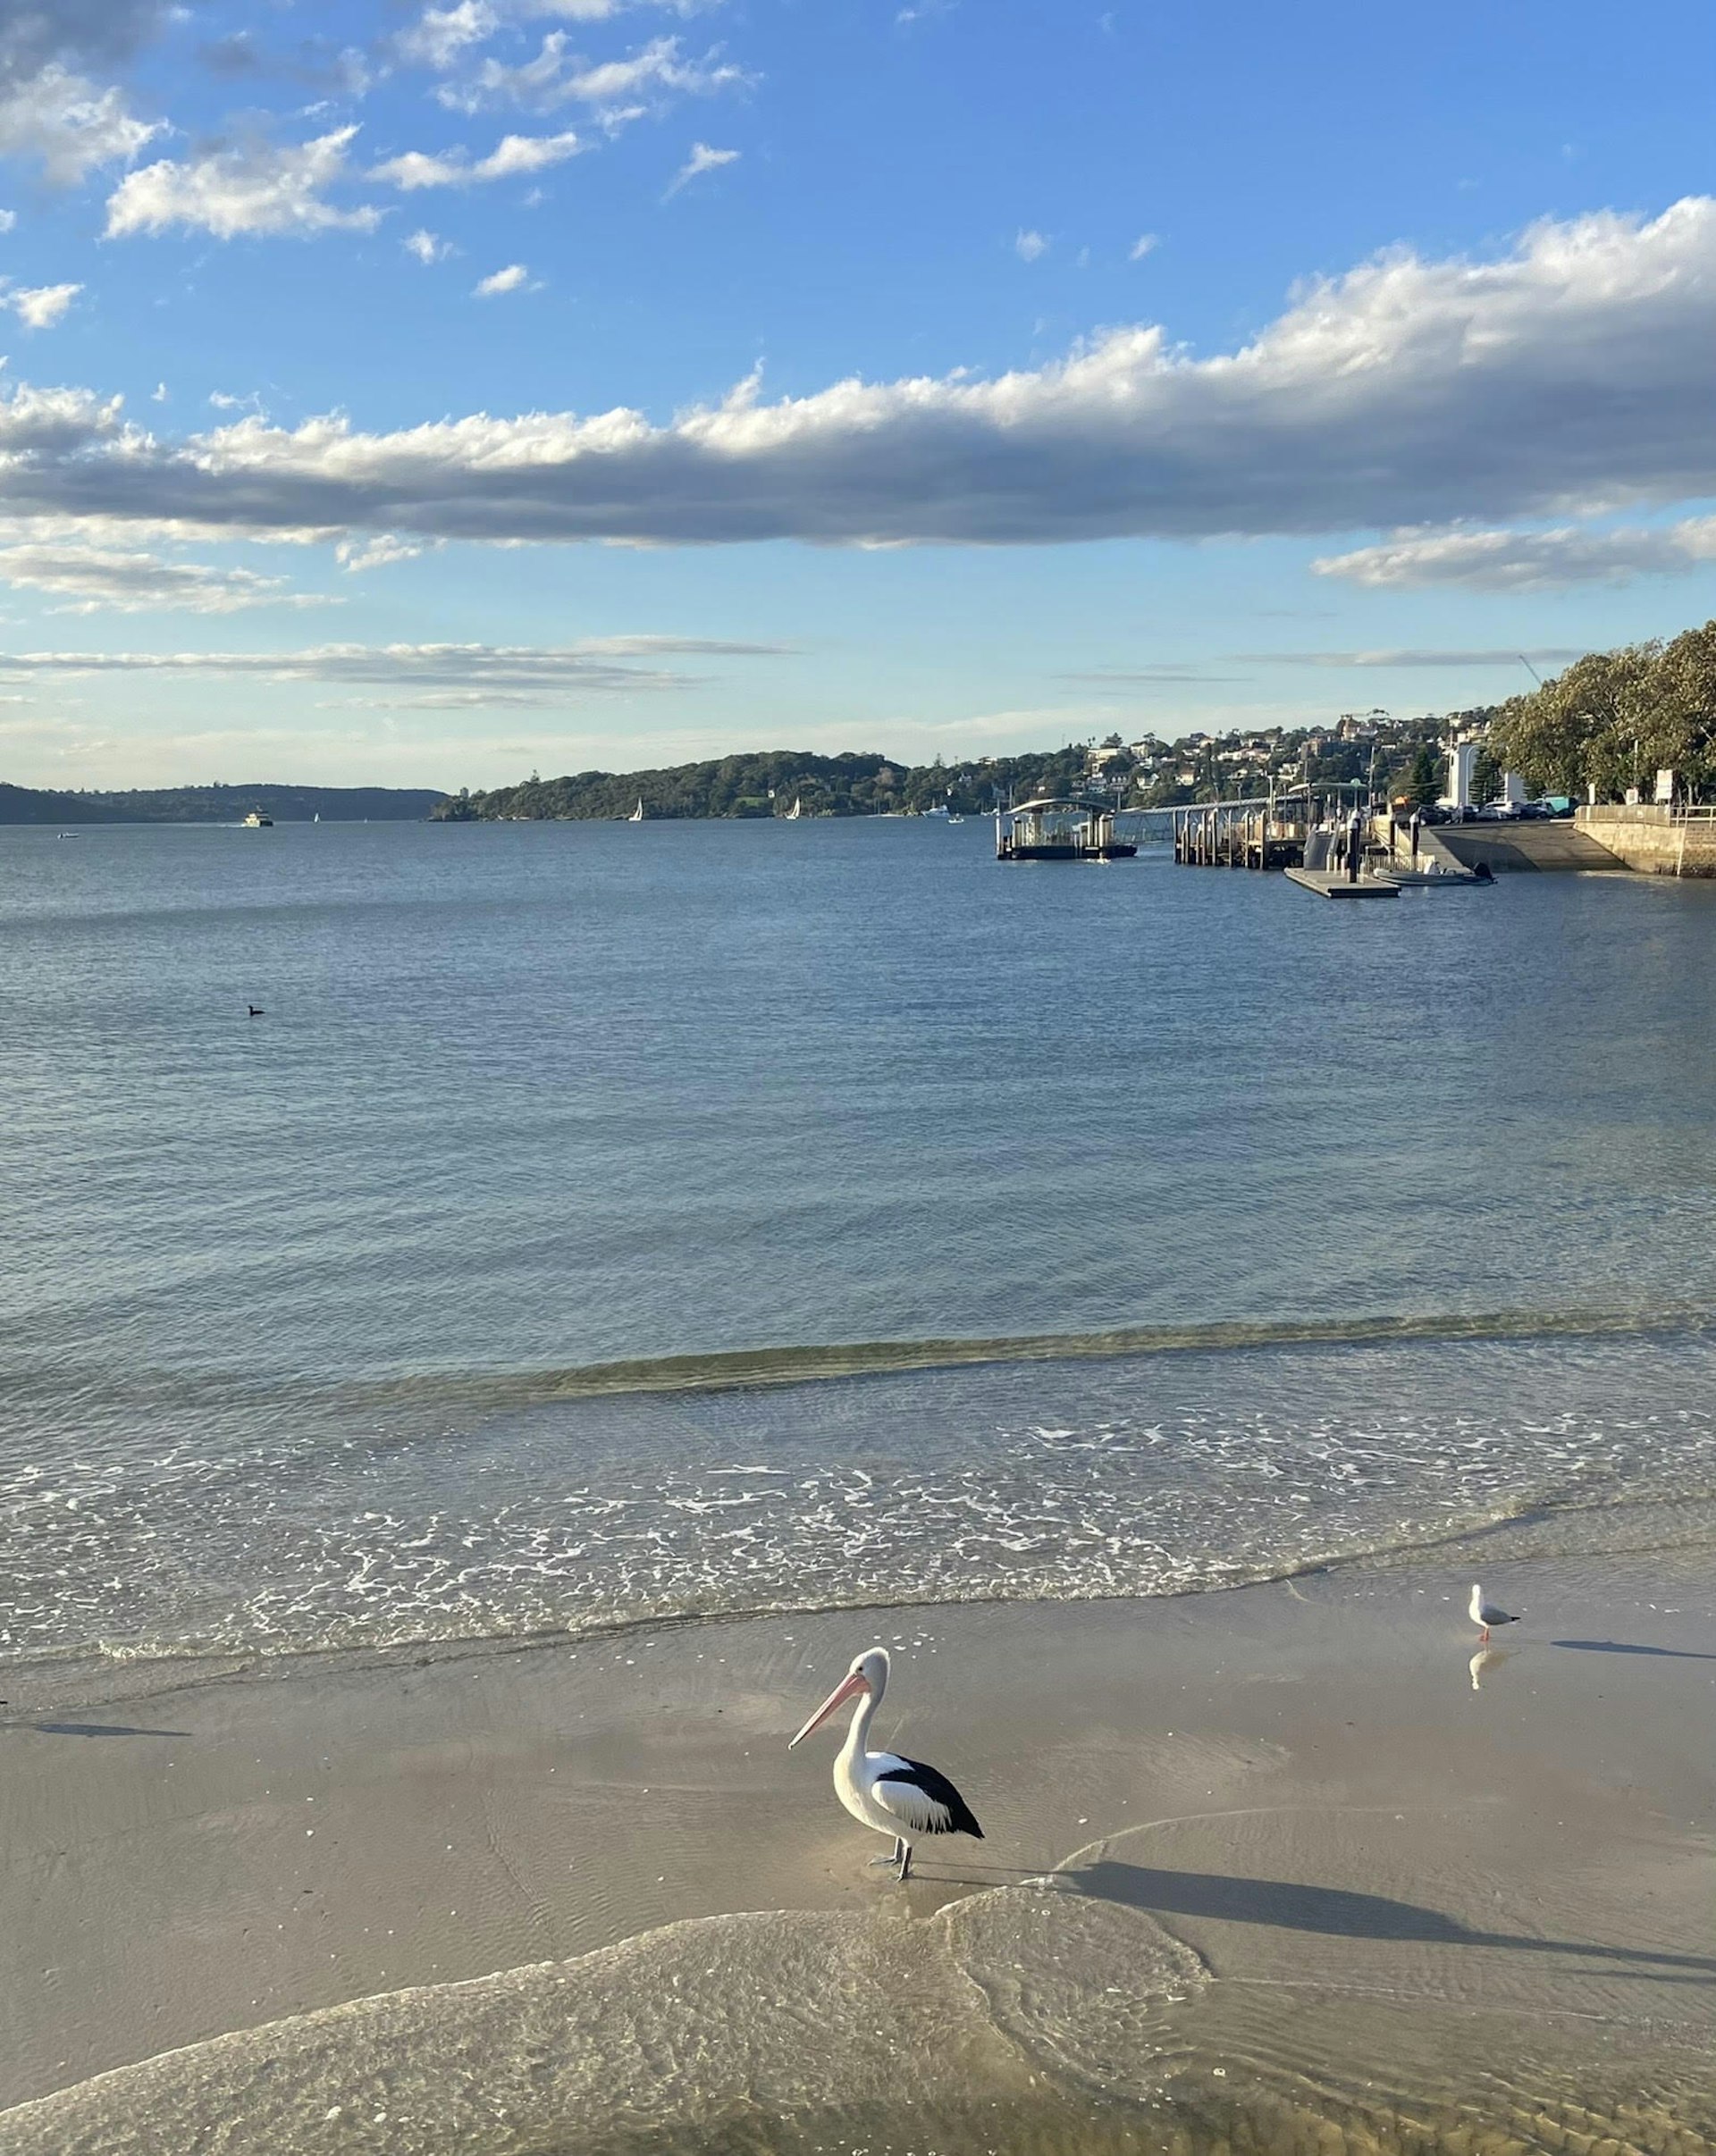 A beach scene just outside of Sydney